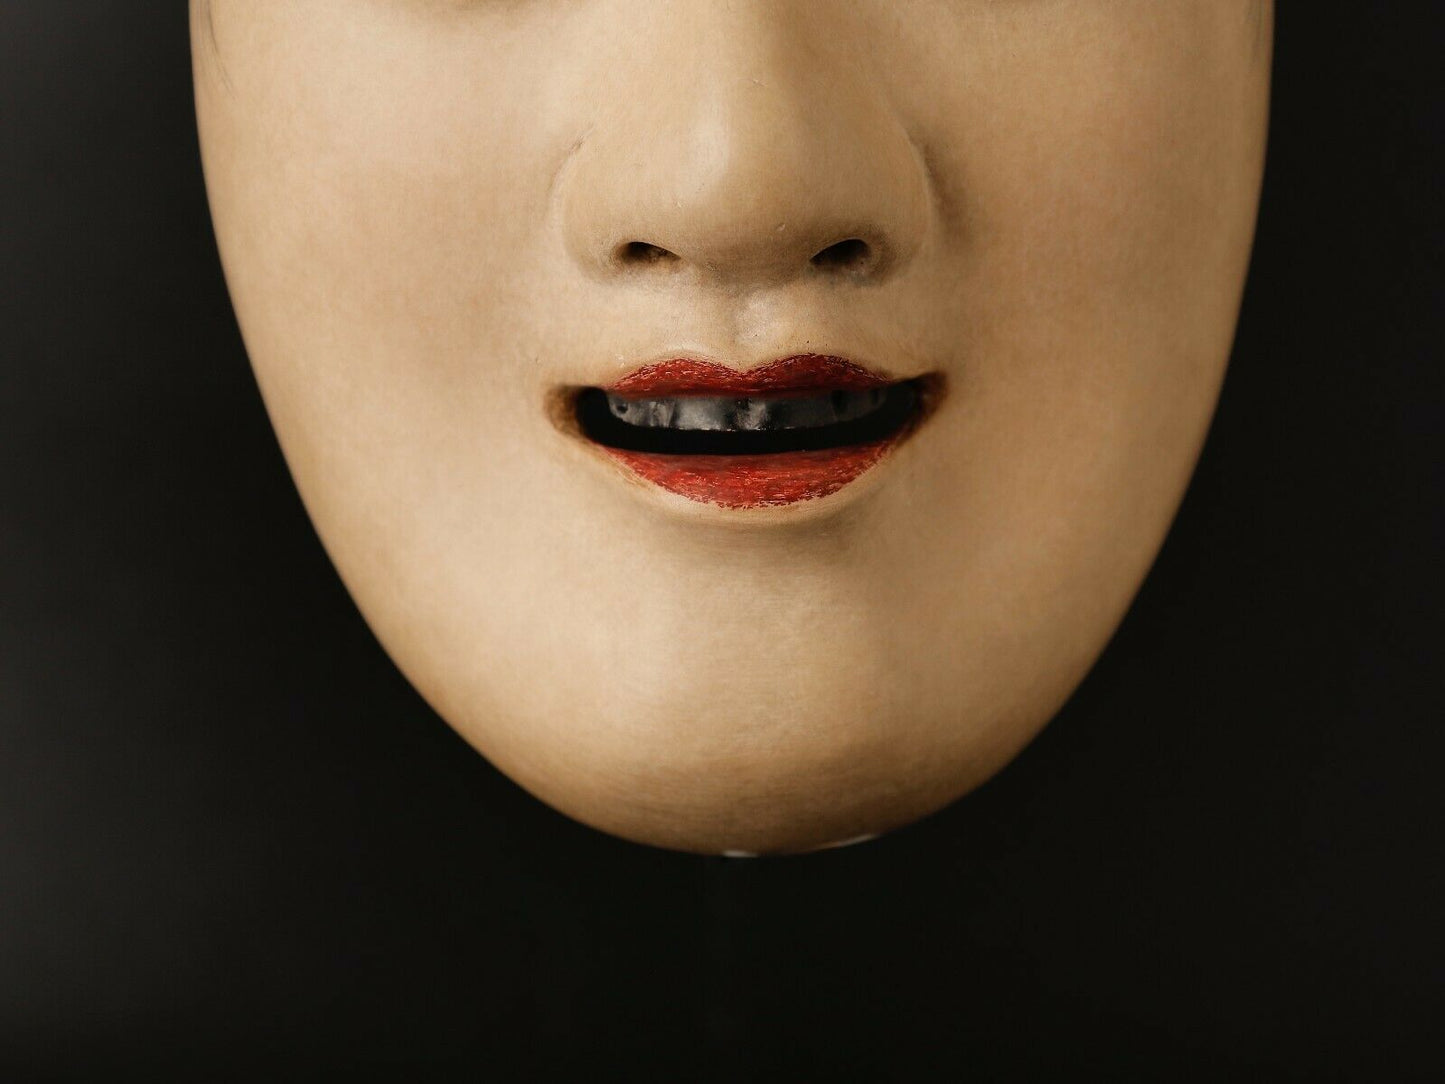 Japanese Jyuroku (sixteen) Noh Mask representing a warriors who die young SS72